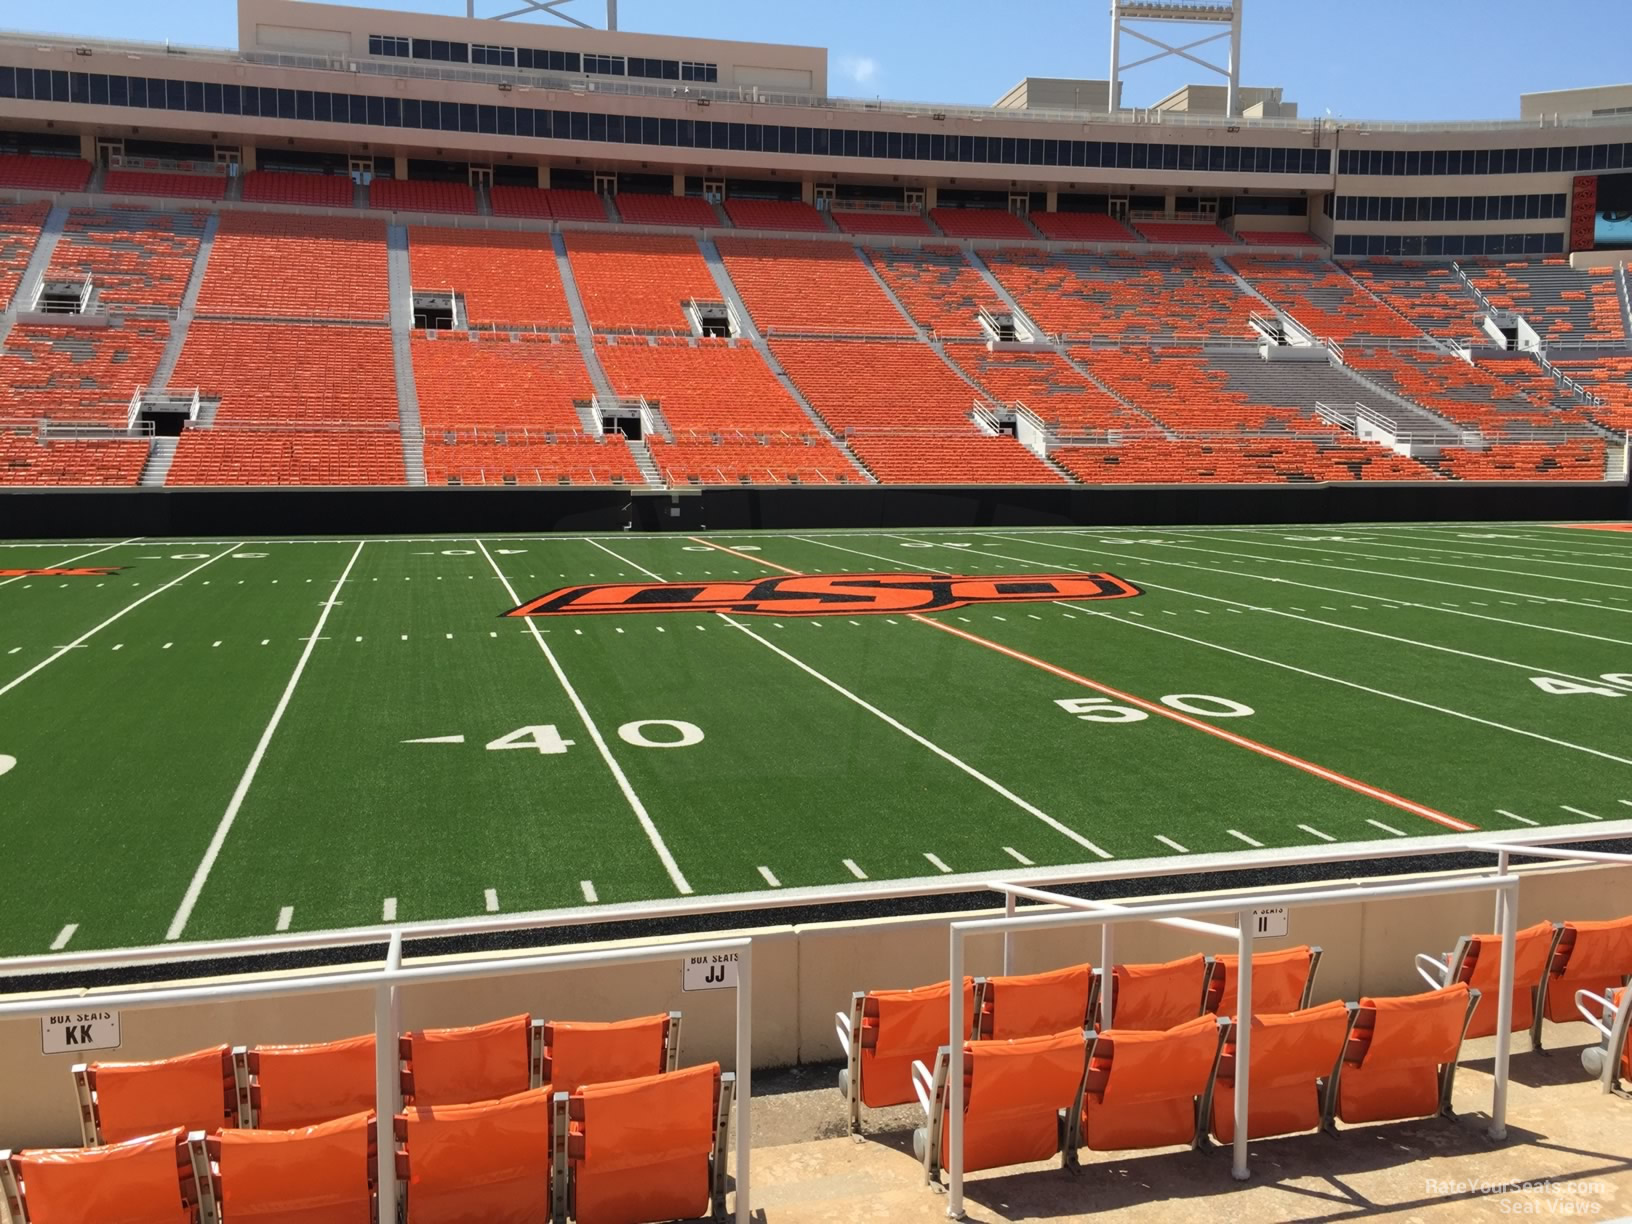 section 118a, row 10 seat view  - boone pickens stadium